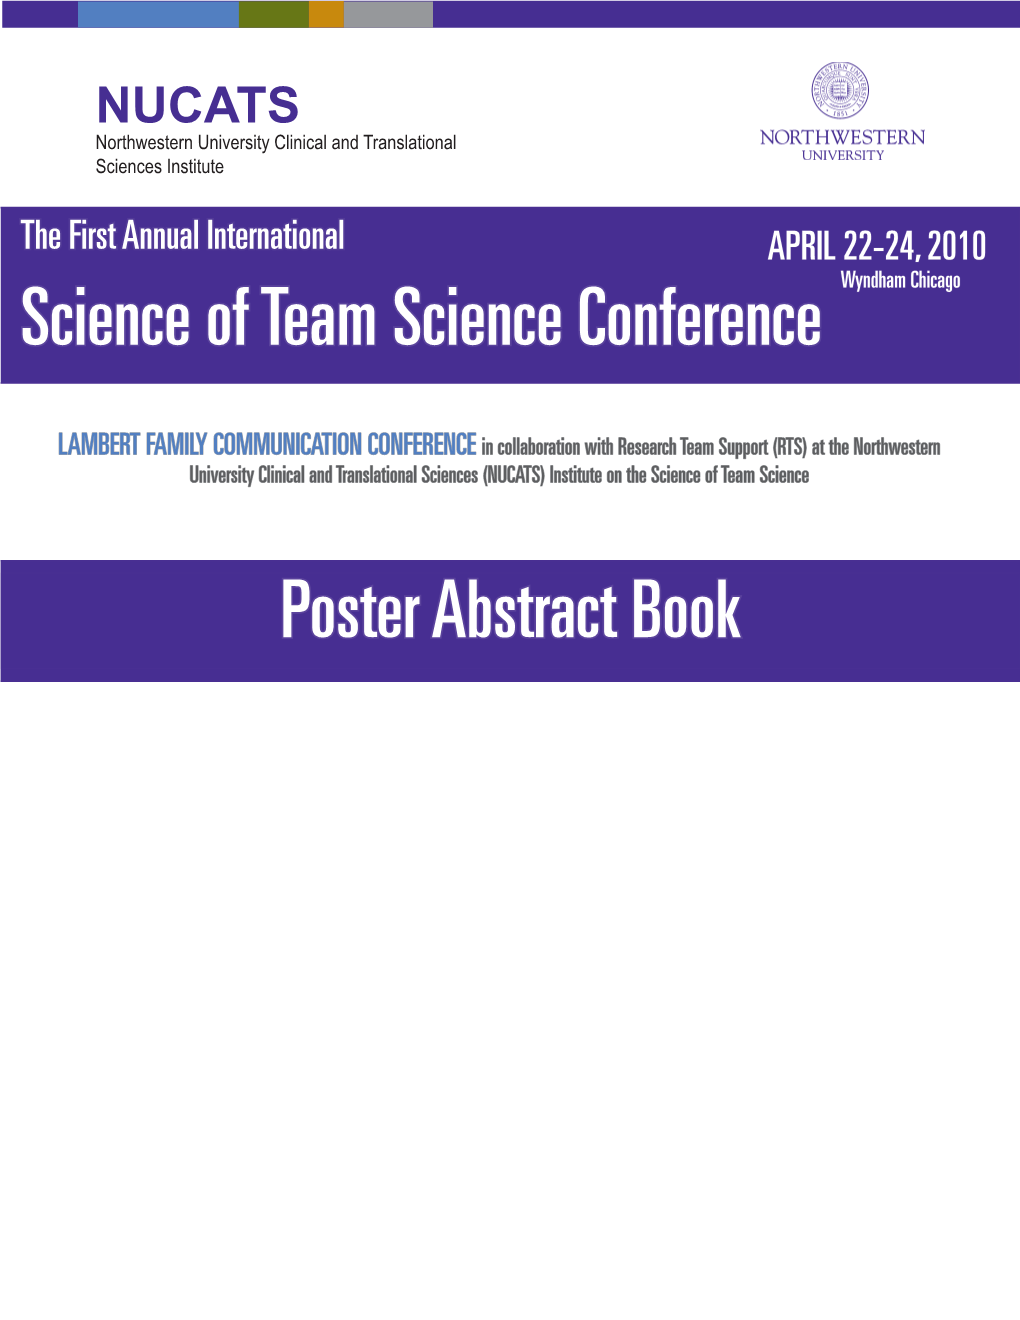 2010 Poster Abstract Book